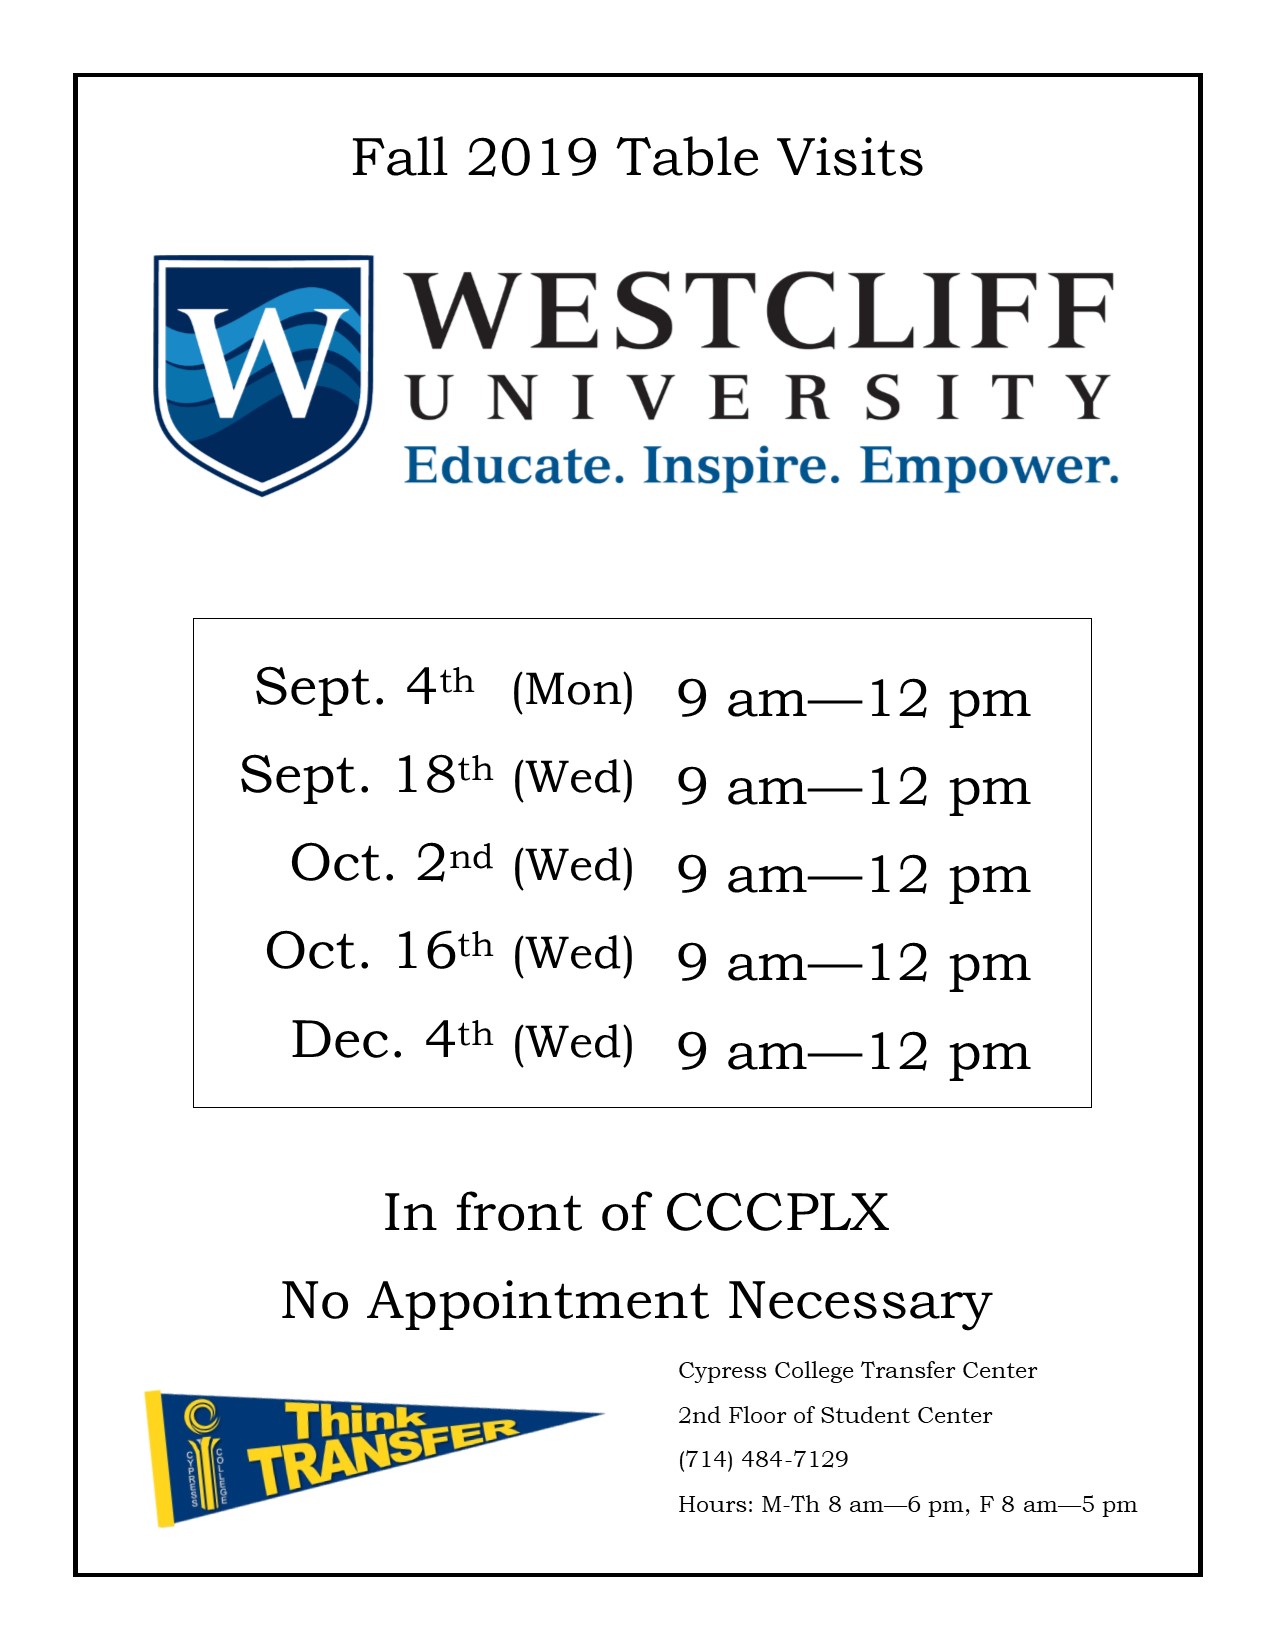 Flyer with white background and Westcliff University logo and transfer pennant